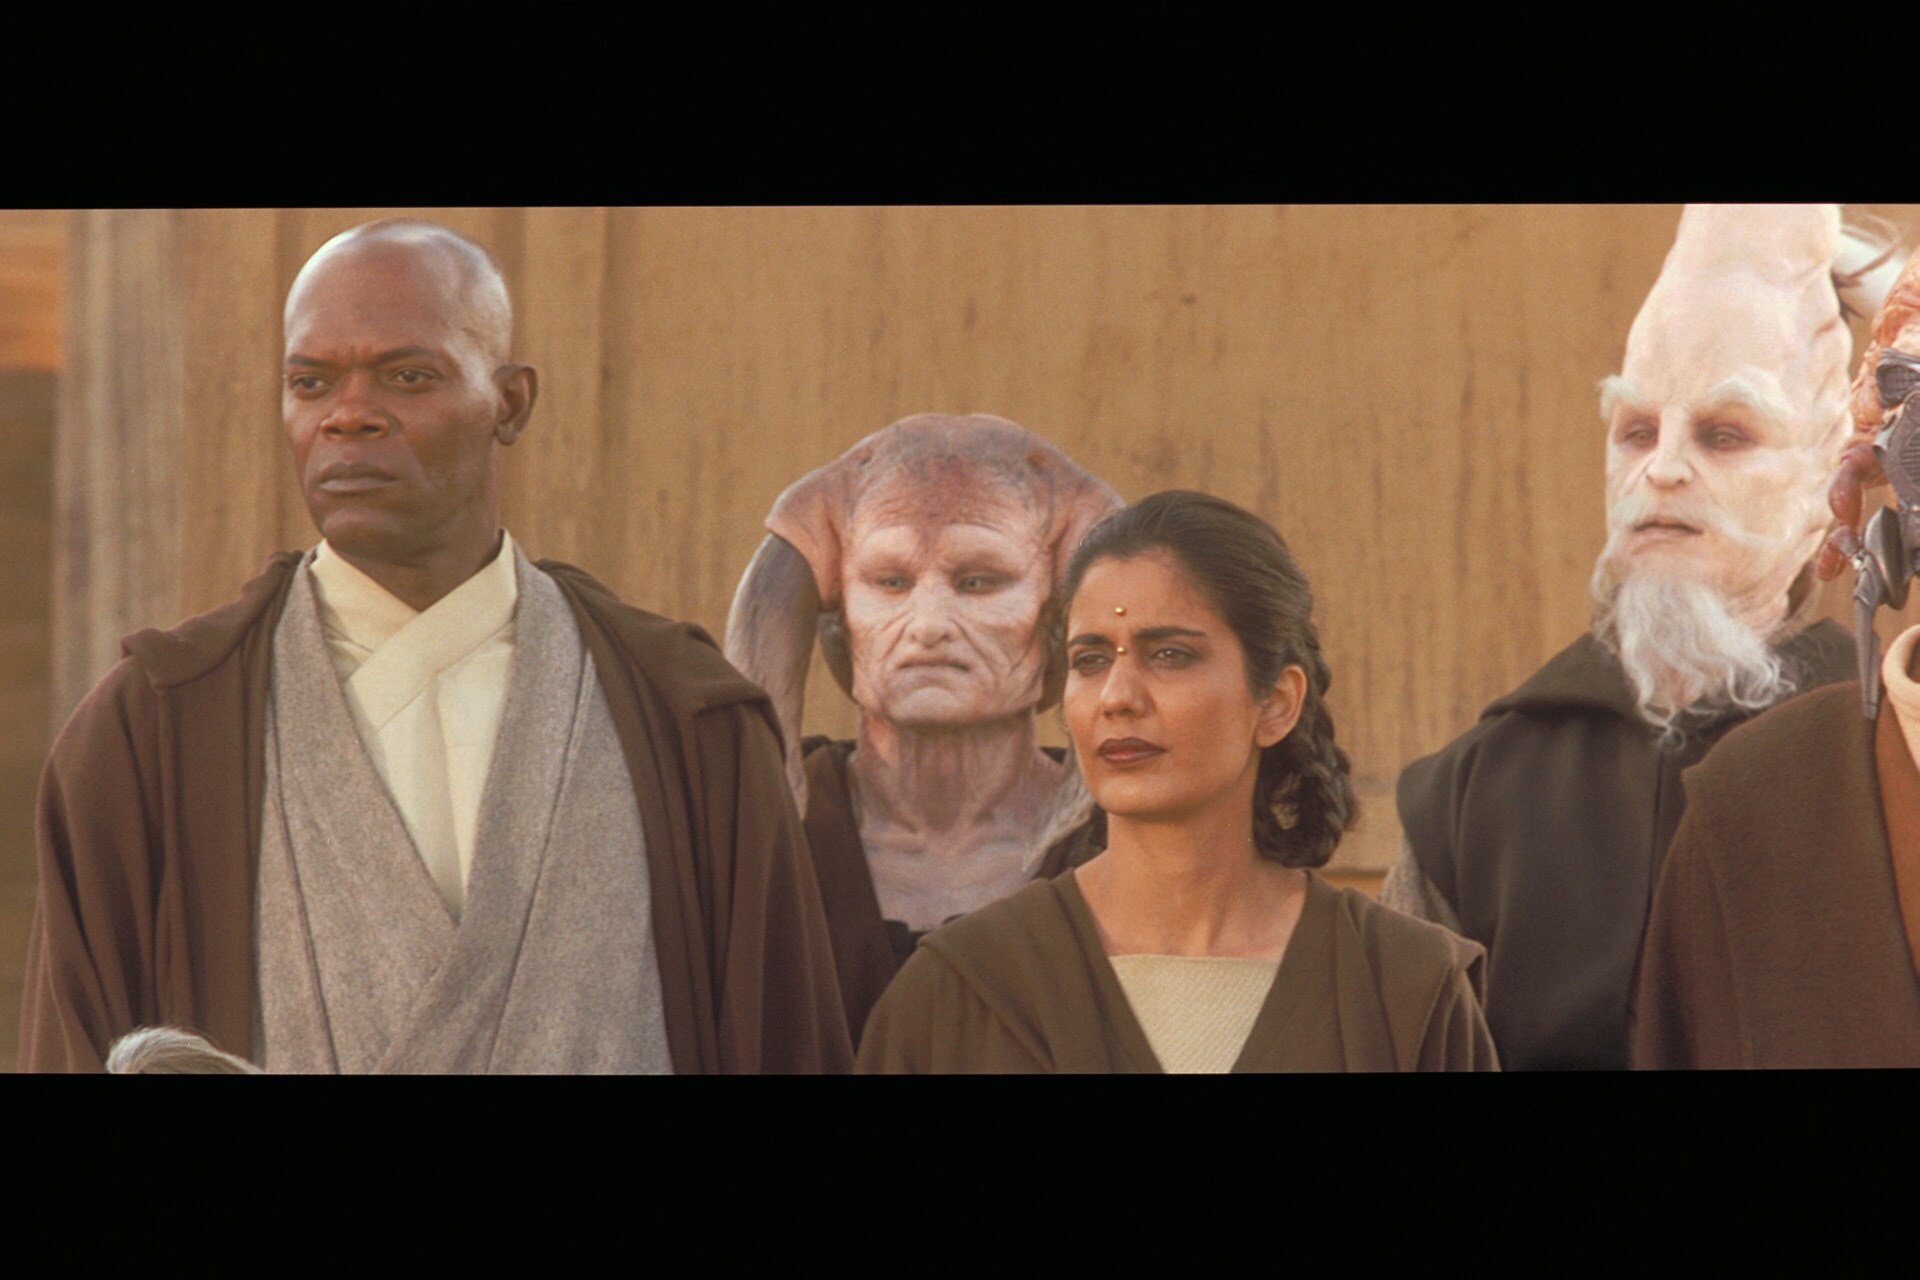 The Inquisitor identifies Kanan’s Master as Depa Billaba. Depa can be seen on the Jedi Council in...